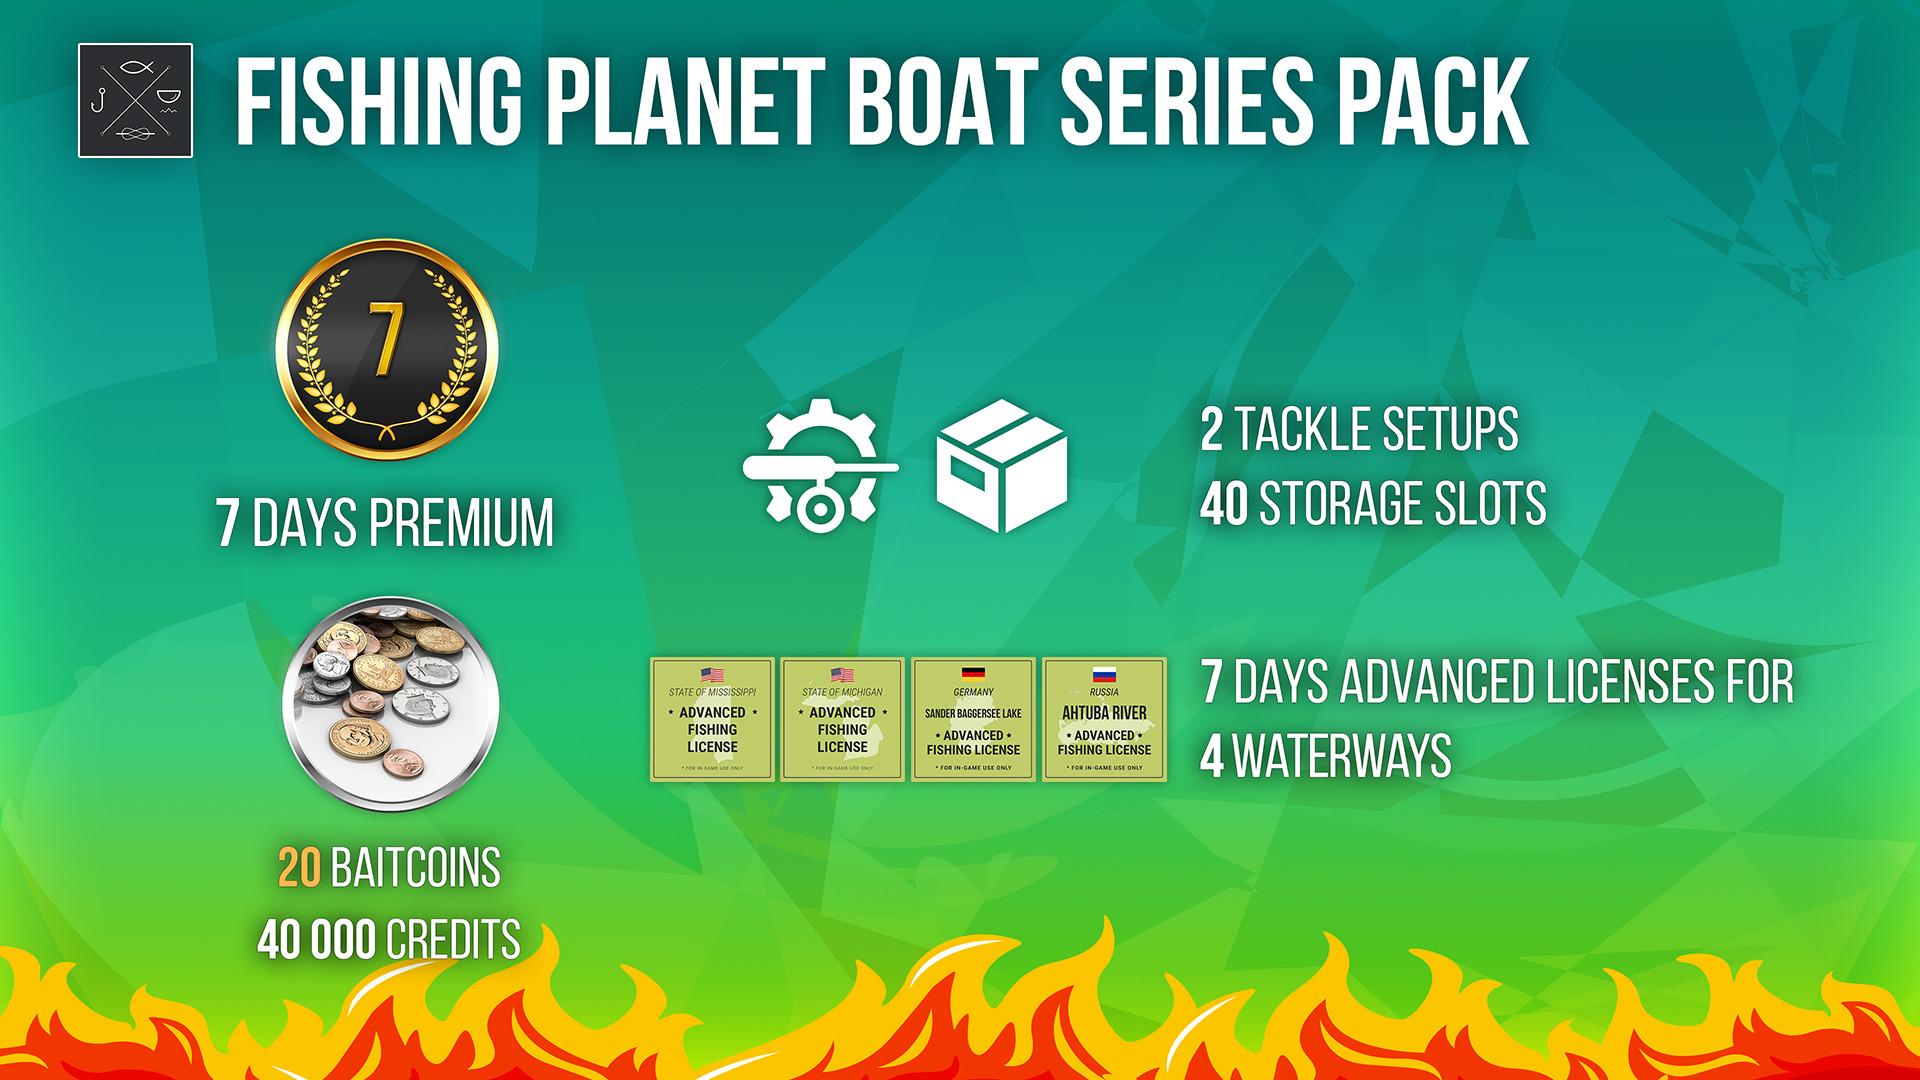 Fishing Planet Boat Series Pack